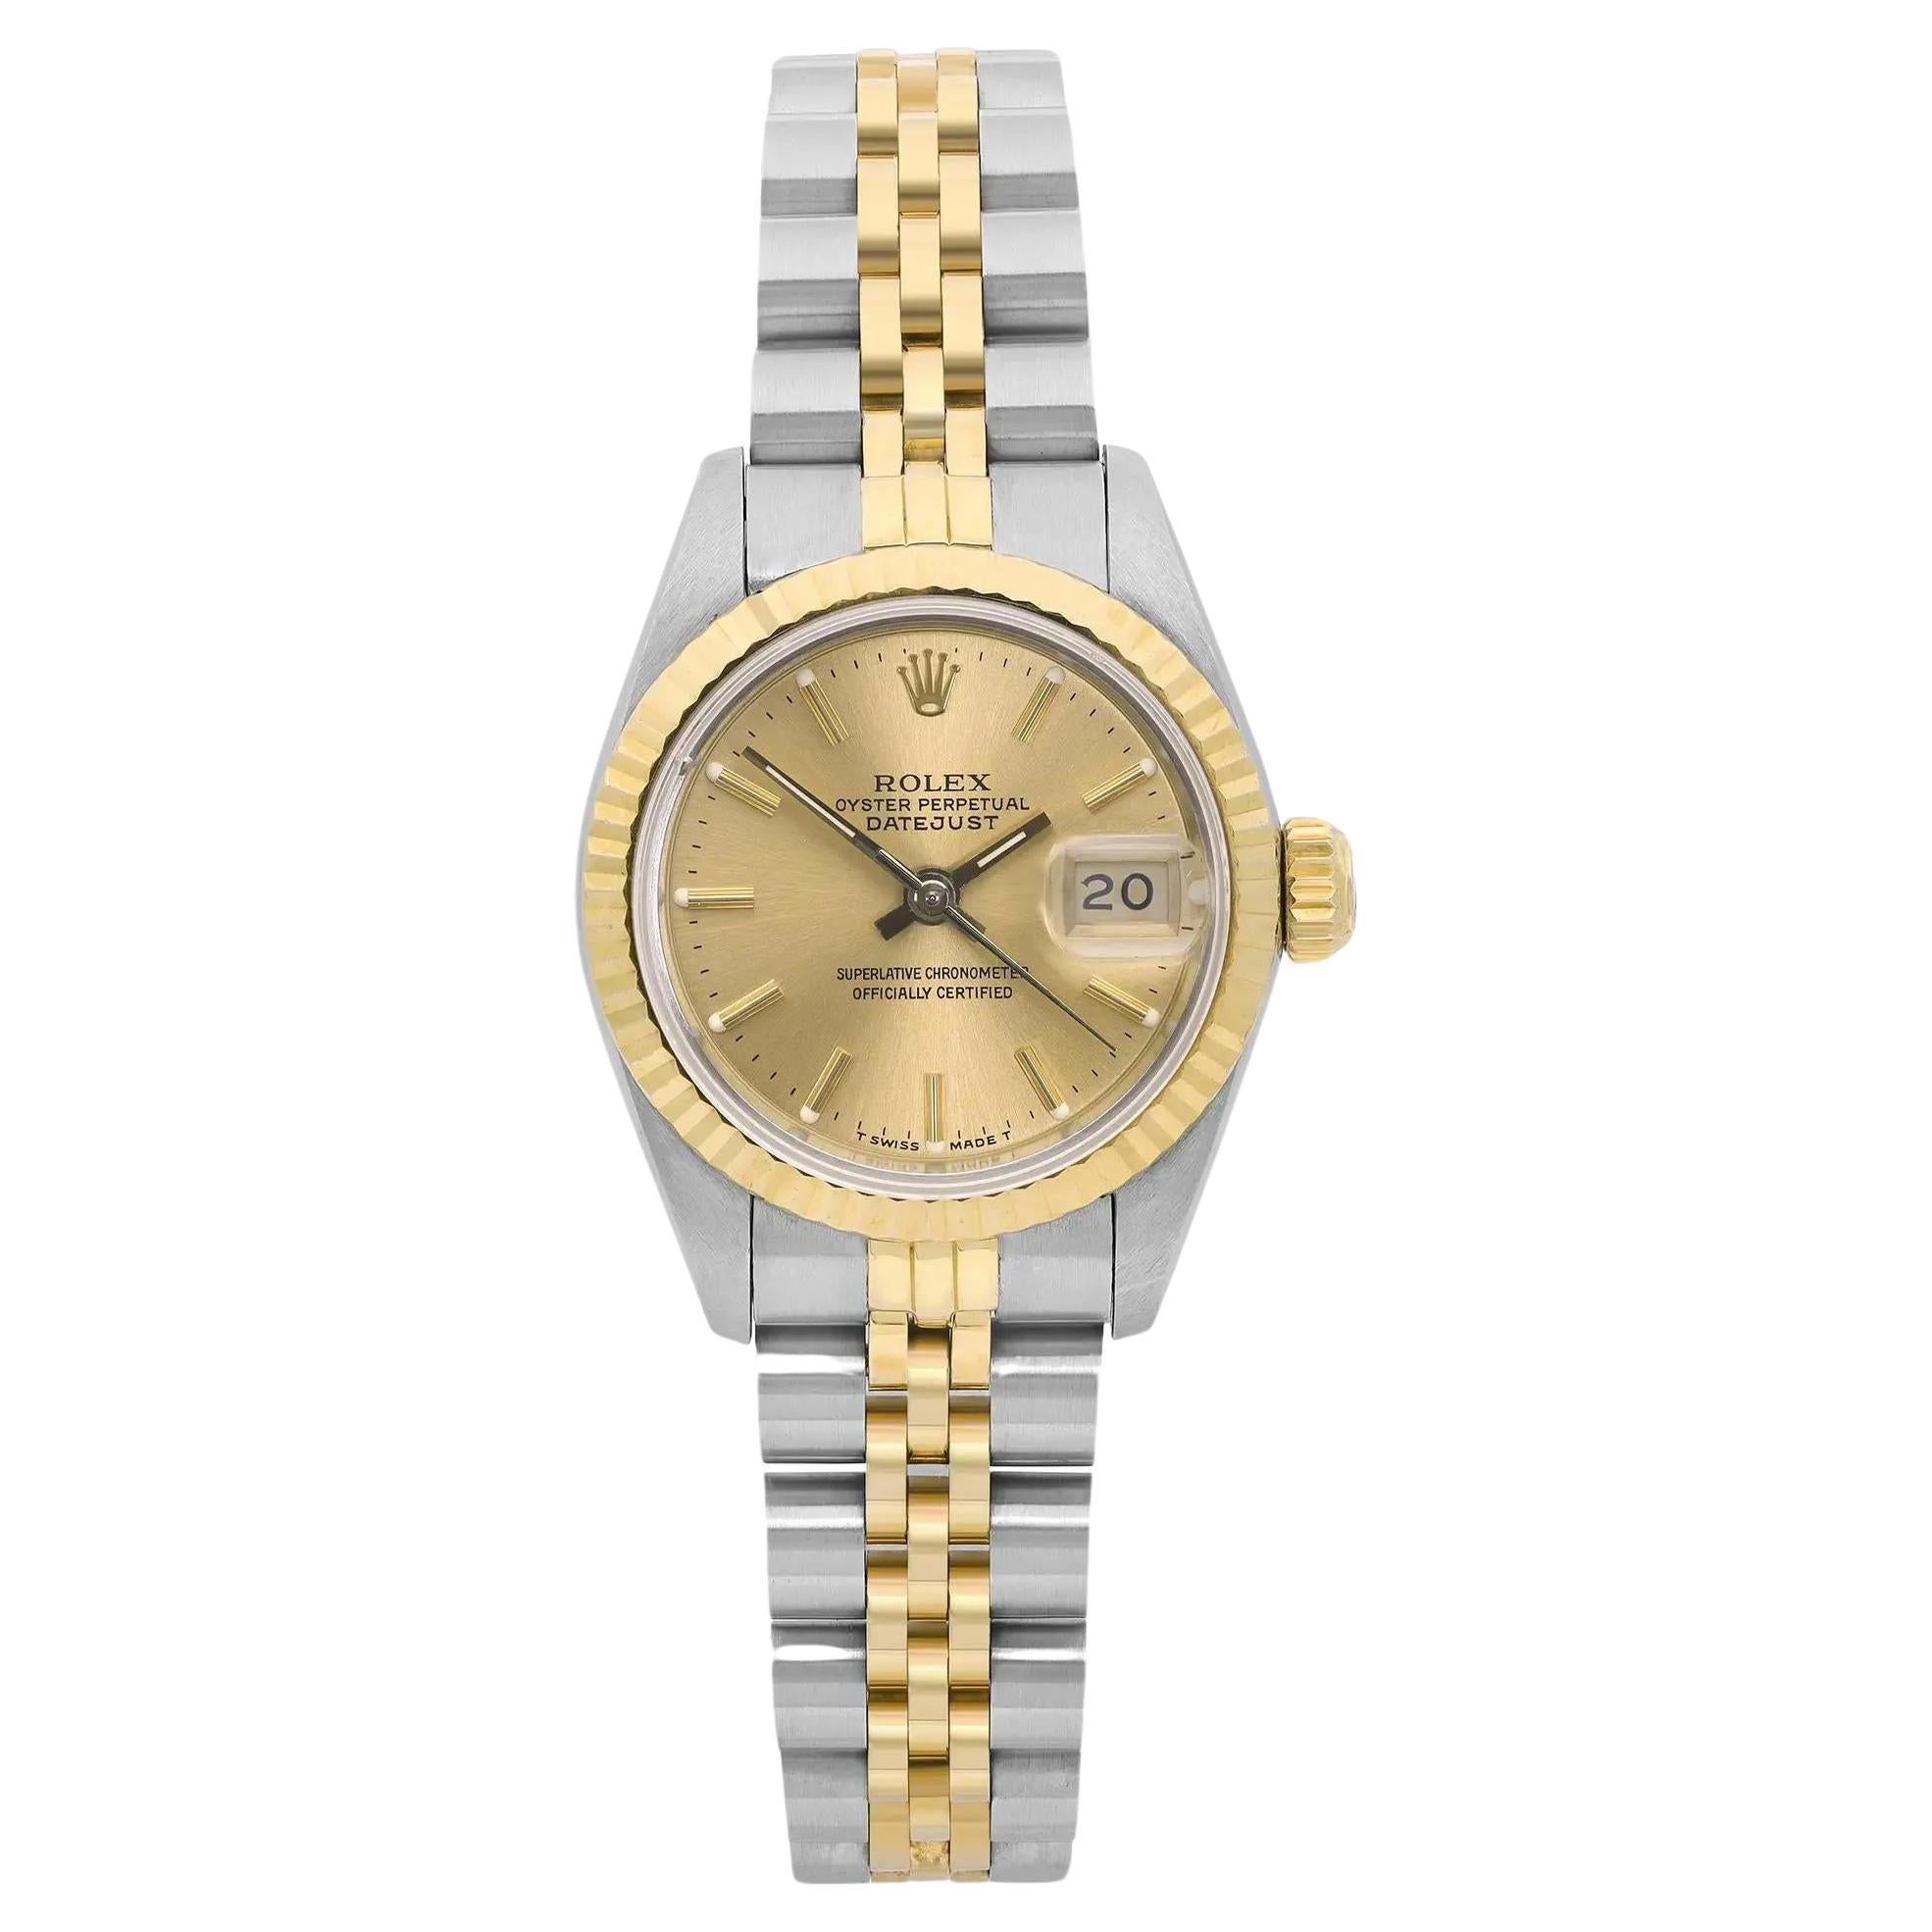 Rolex Datejust 18k Yellow Gold Holes Case Champagne Dial Ladies Watch 69173